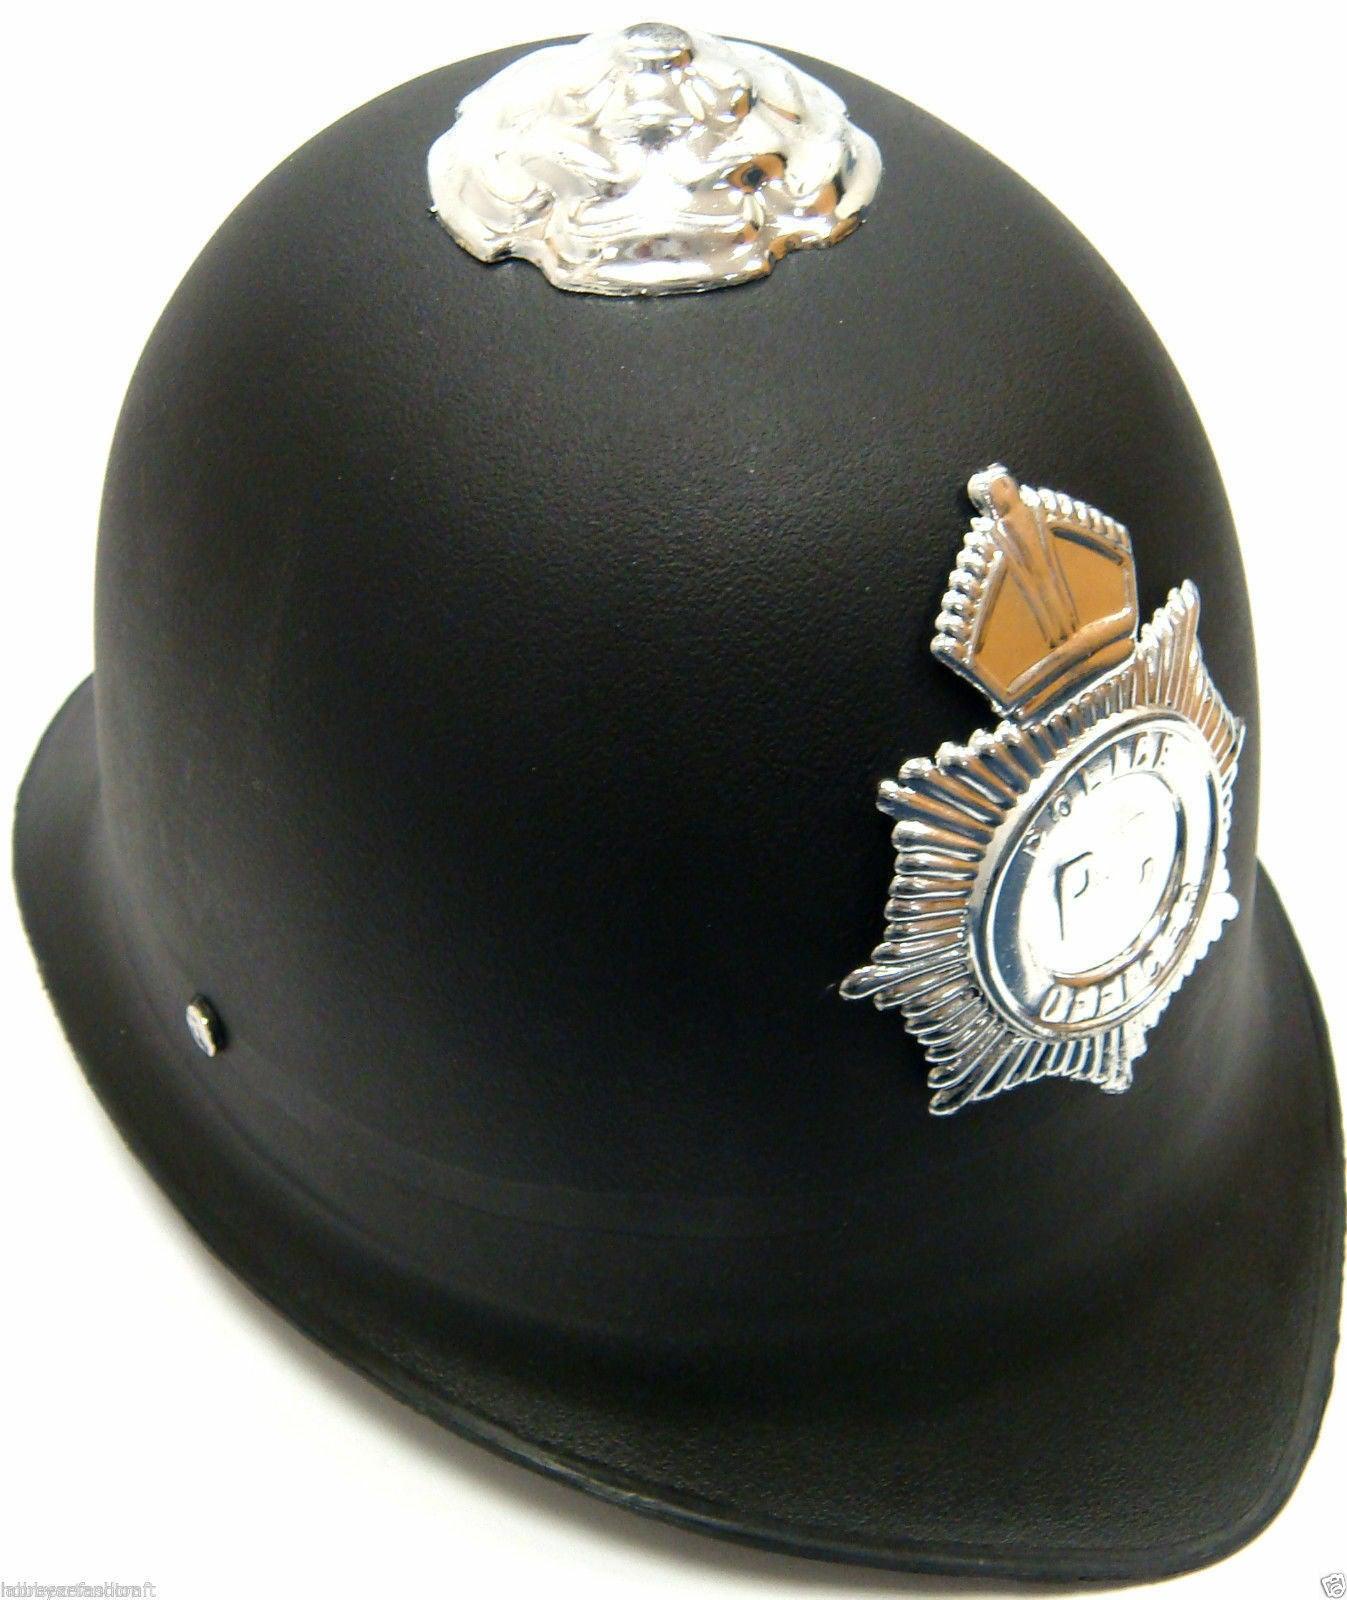 New Policeman Hat Copper Bobby Hat Helmet Police Hat Police Style Cap - Labreeze